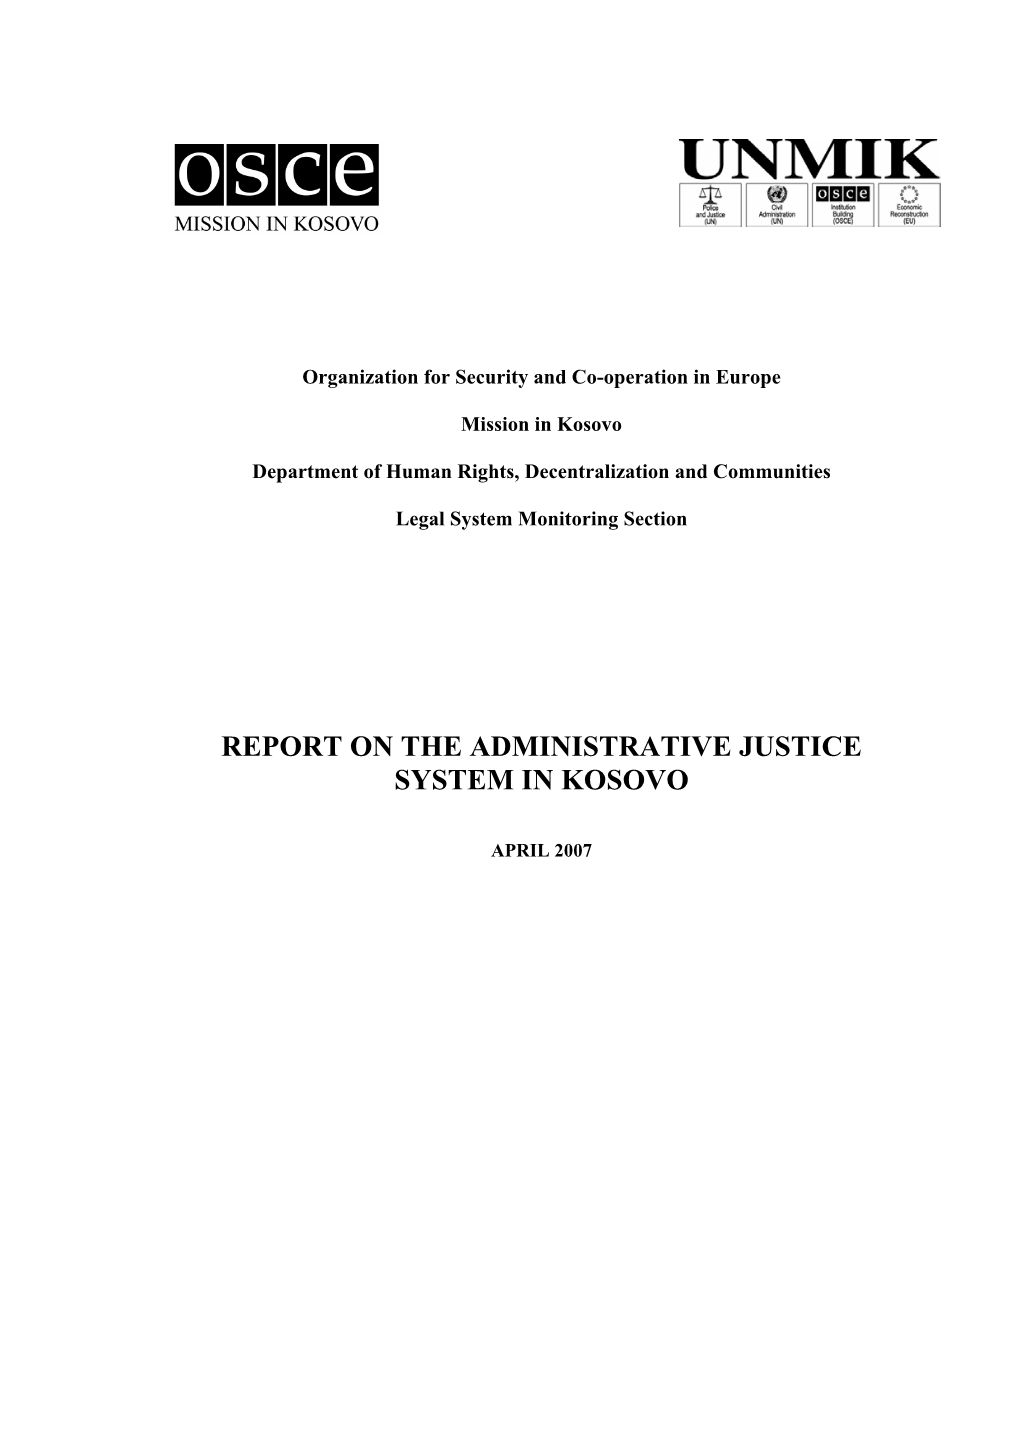 Report on the Administrative Justice System in Kosovo